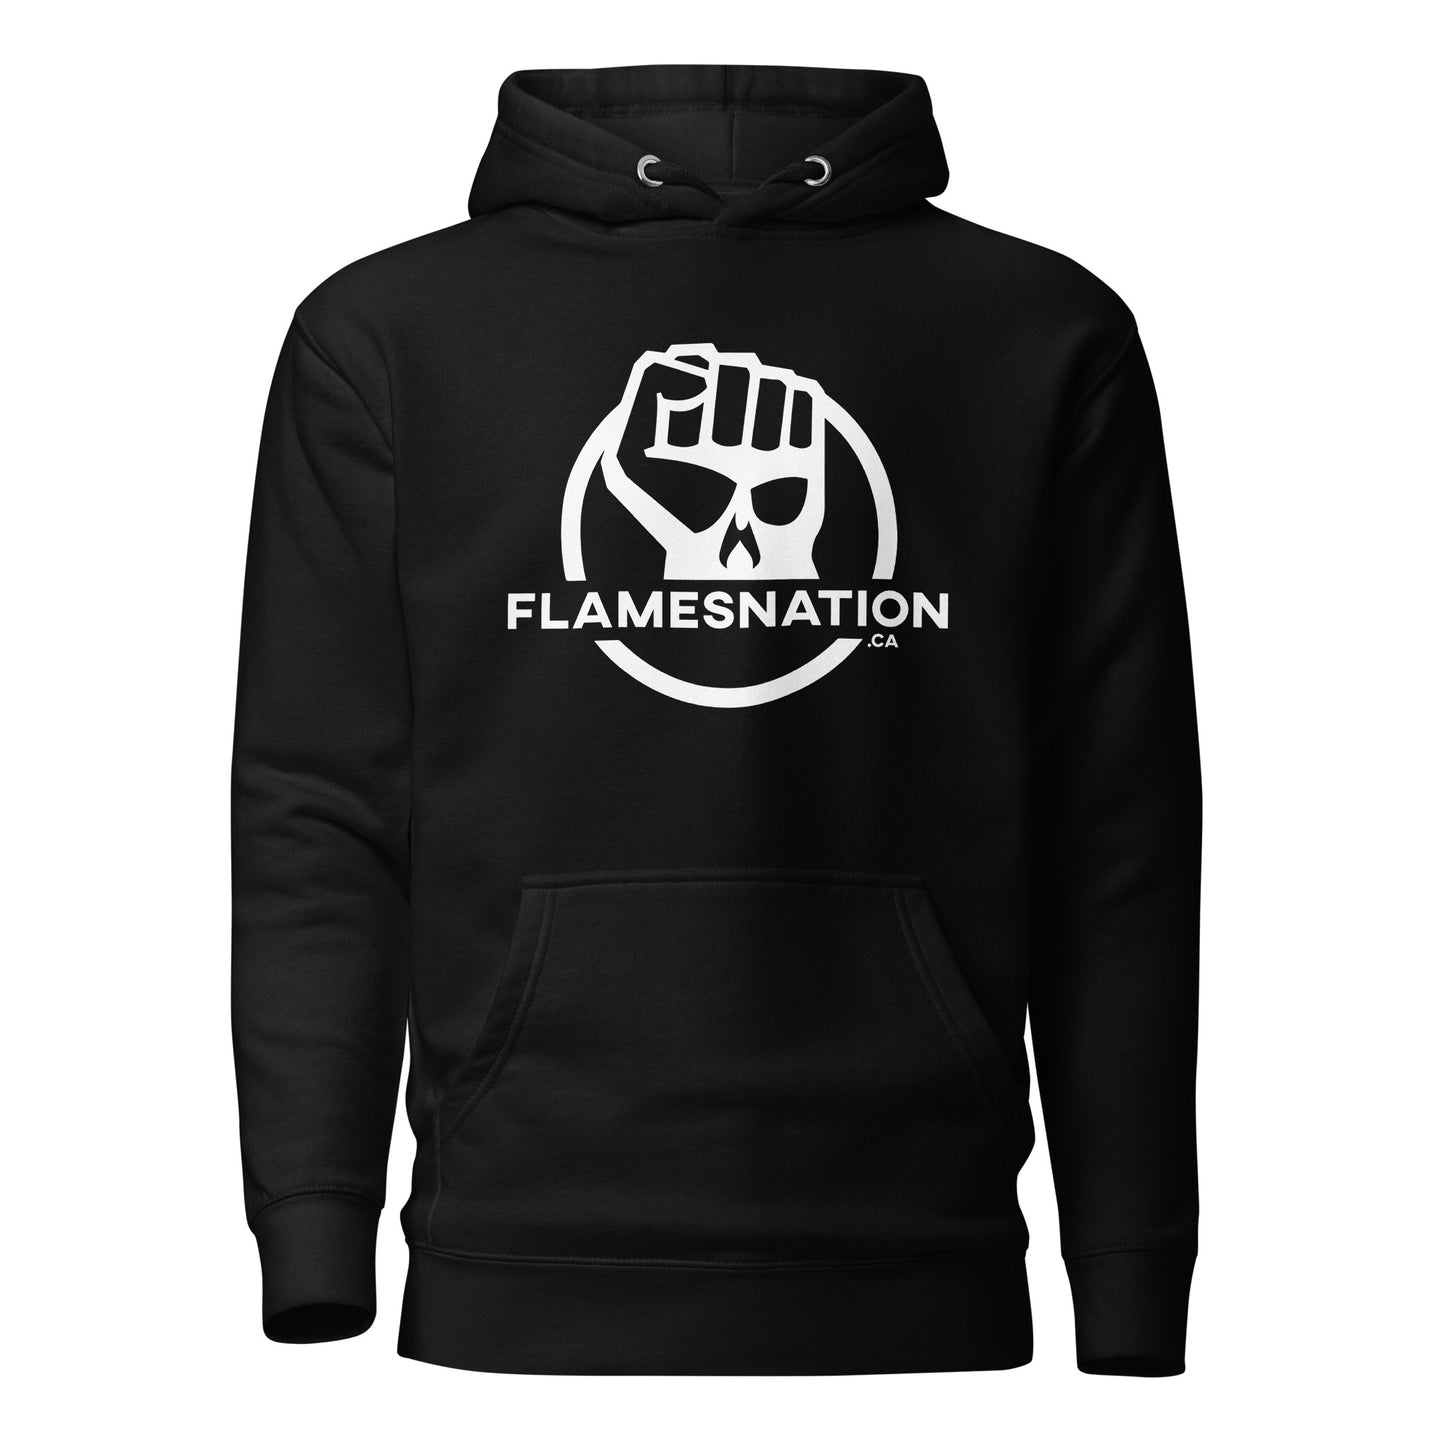 THE CLASSICS - Flamesnation Full Chest Hoodie